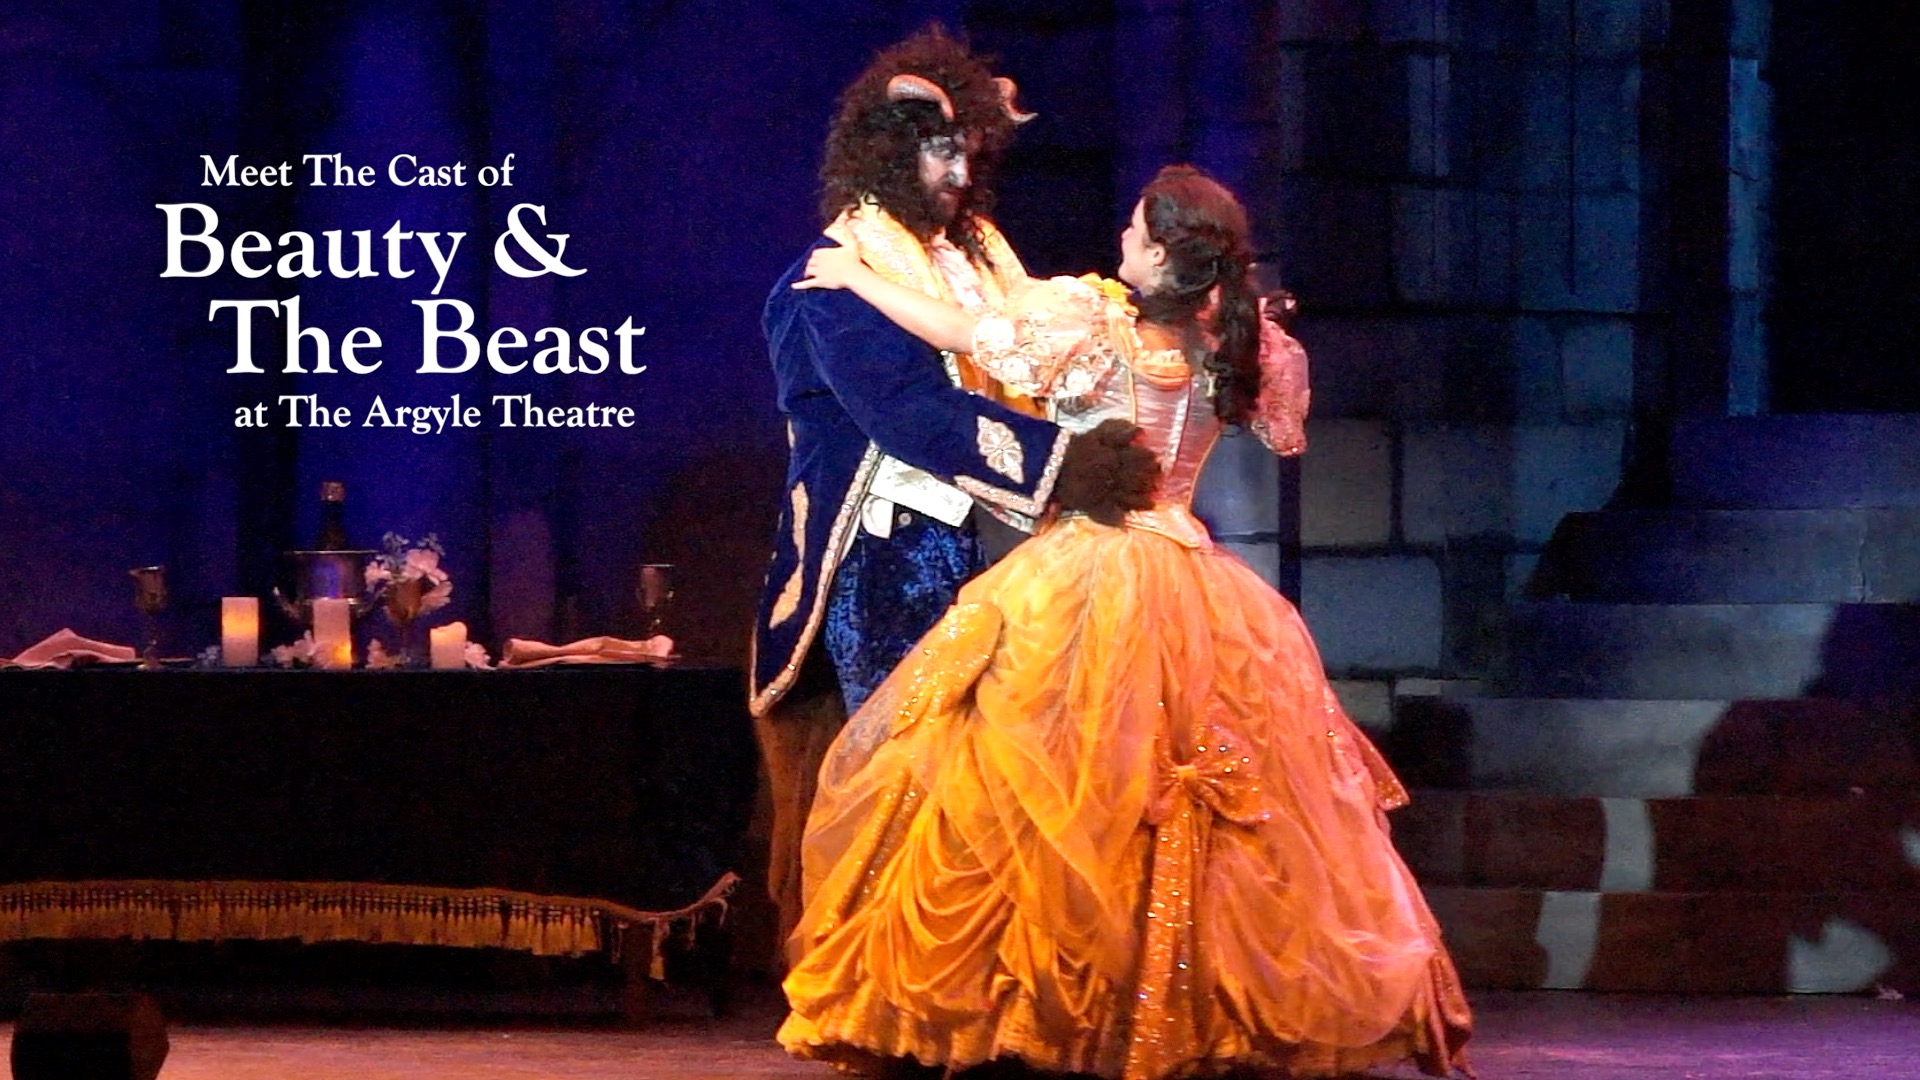 Meet The Cast of Beauty and the Beast at The Argyle Theater